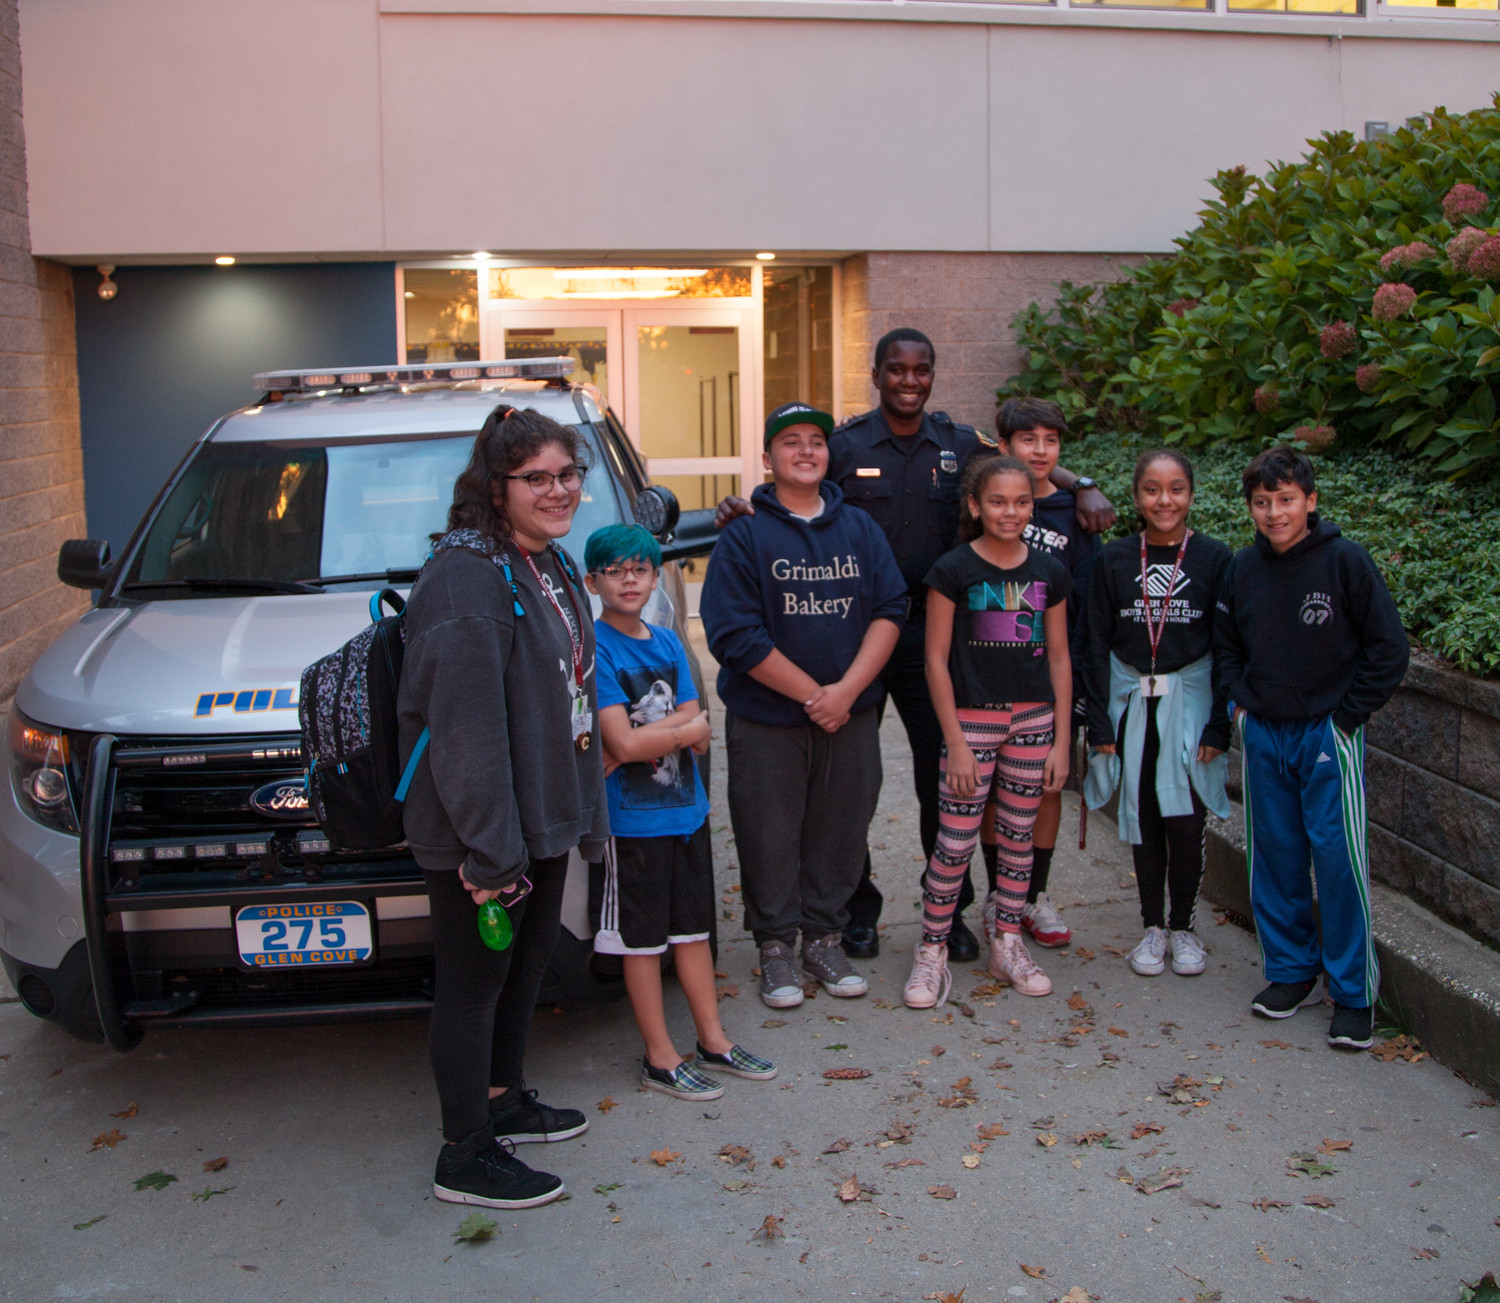 Glen Cove Police Officer Pittman showed the kids a police vehicle at the GCB&GC Lights on Afterschool event on Oct. 26.